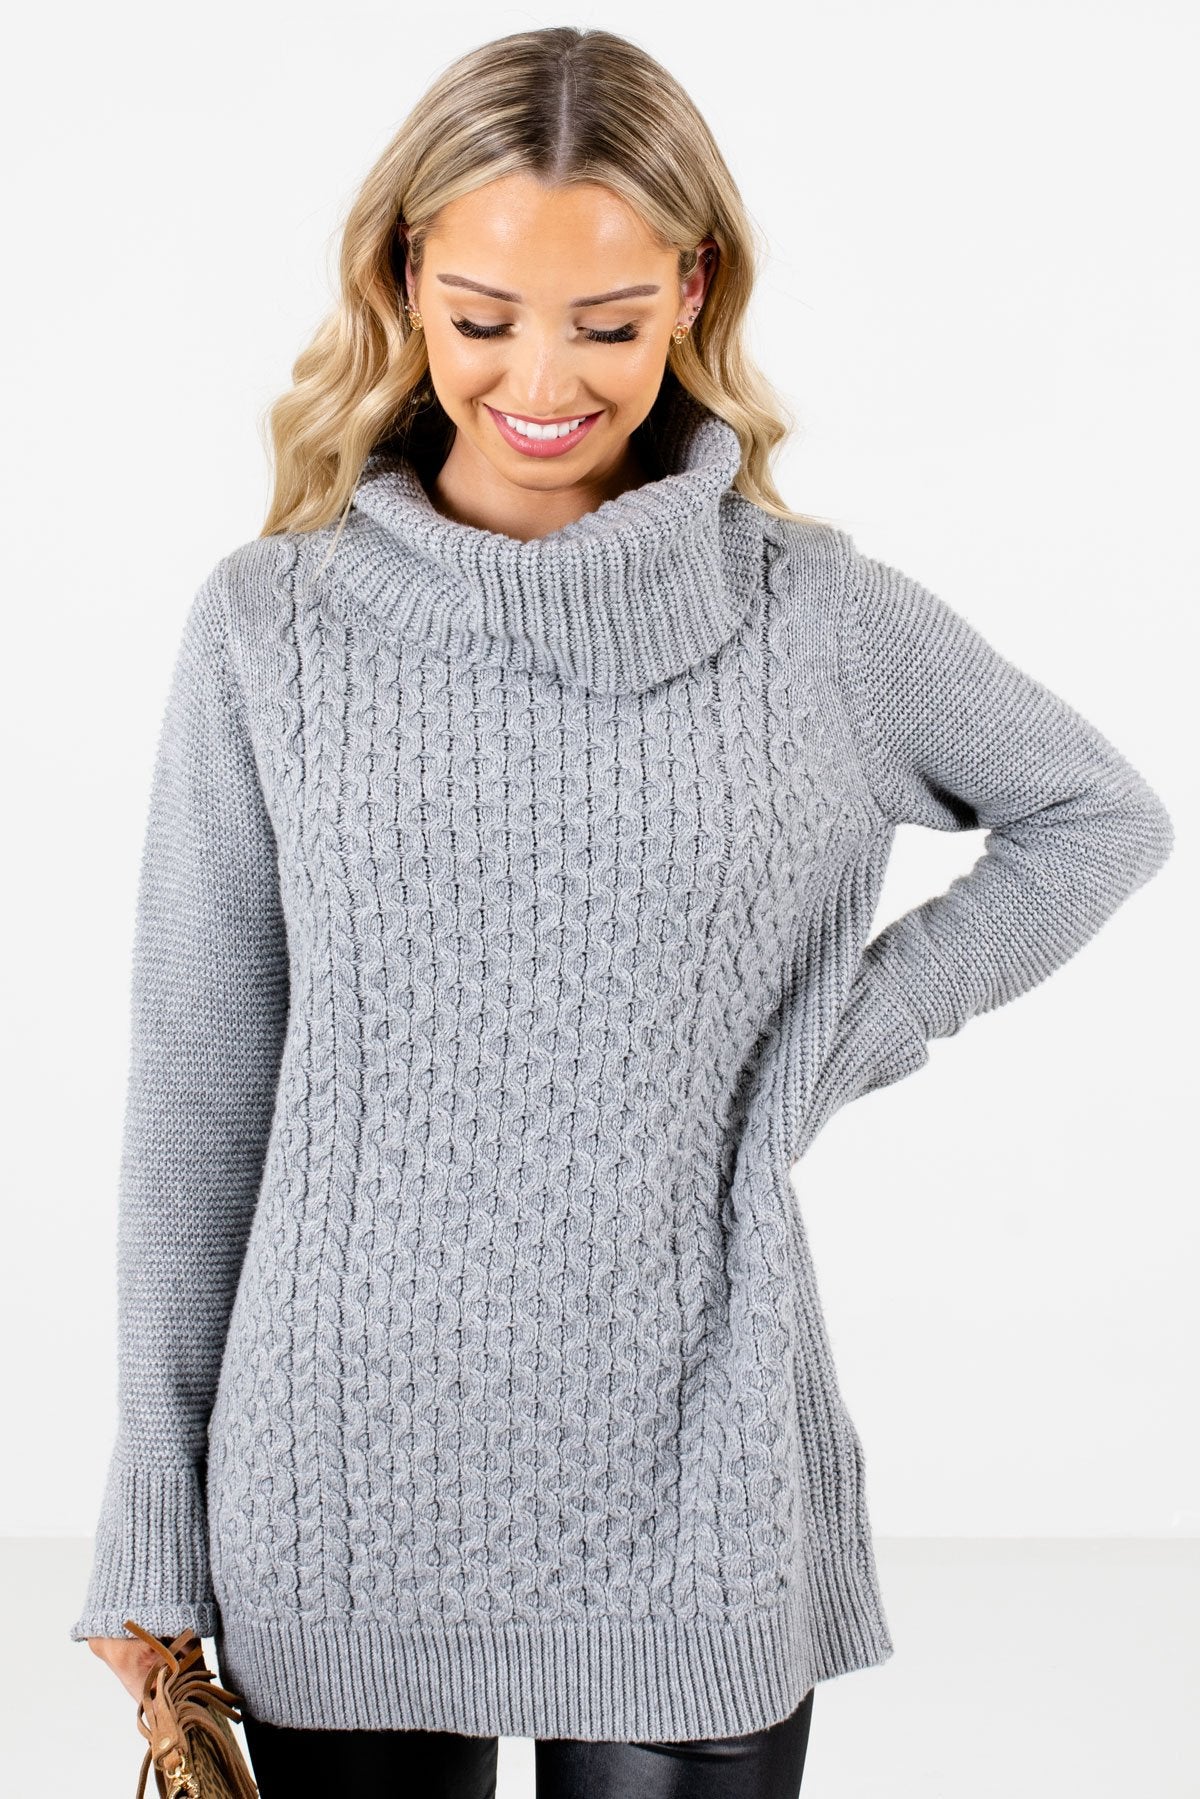 Gray High-Quality Knit Material Boutique Sweaters for Women